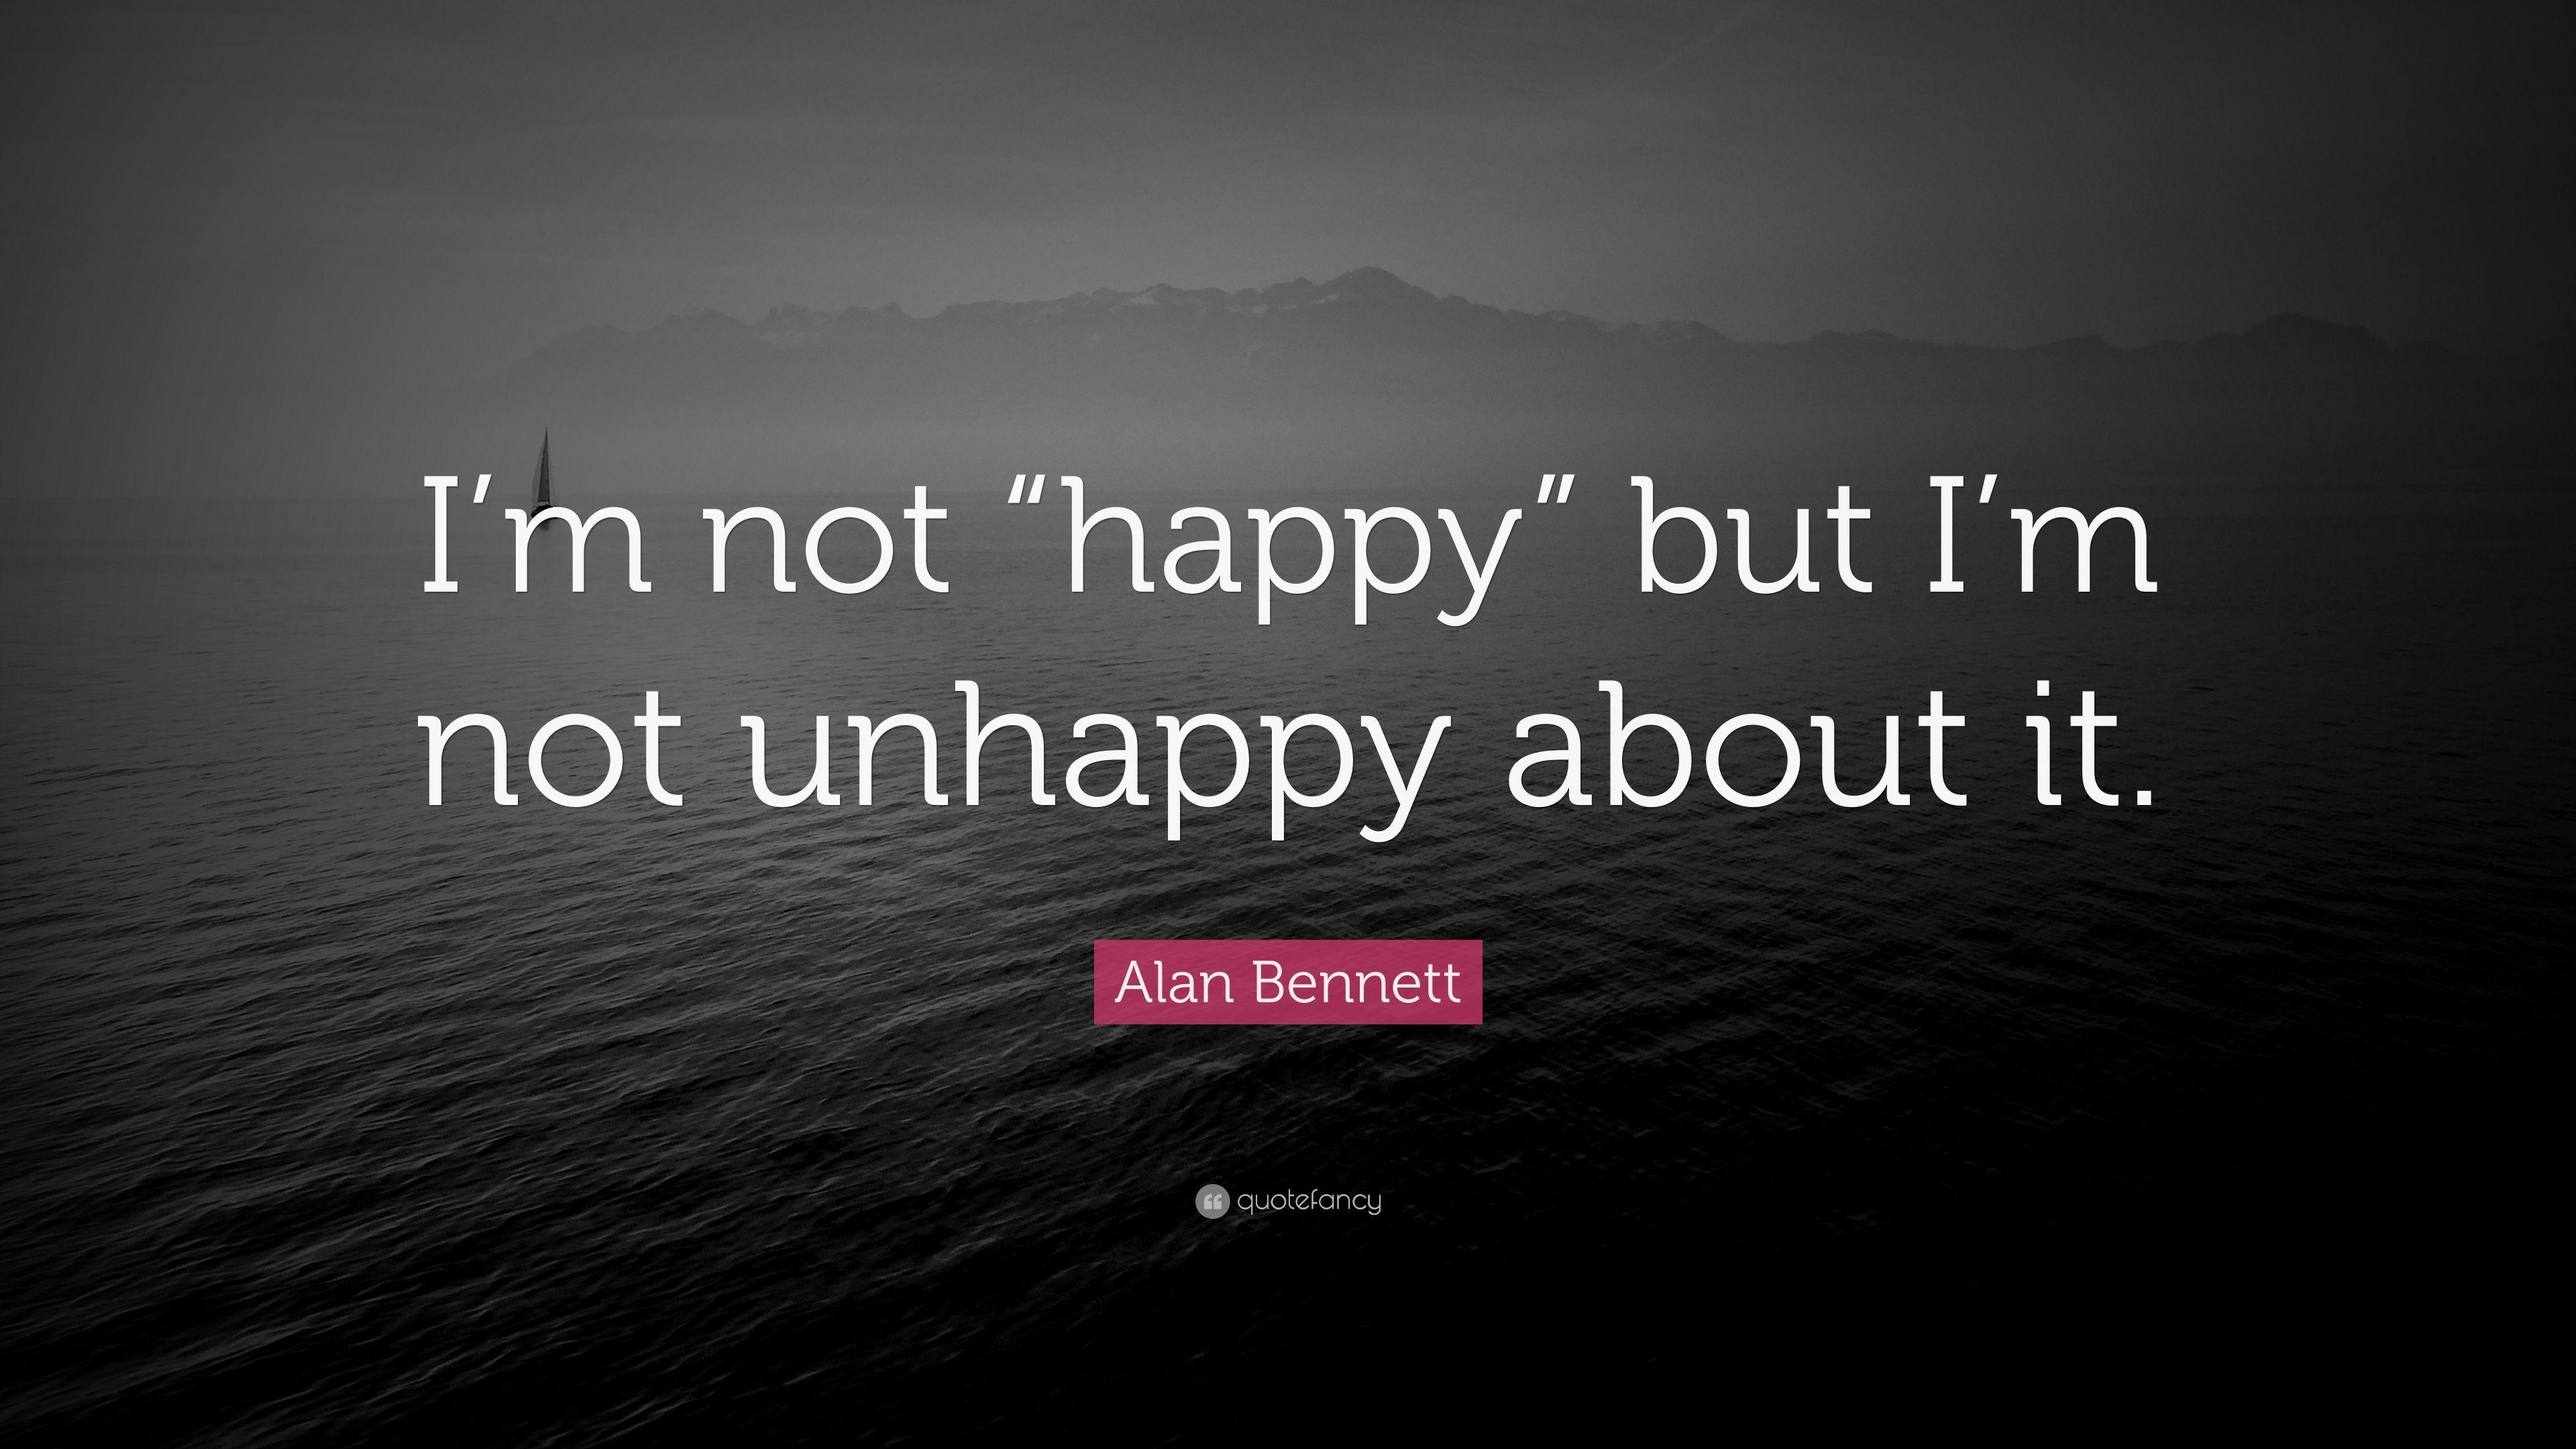 Alan Bennett Quote: “I'm not “happy” but I'm not unhappy about it.”